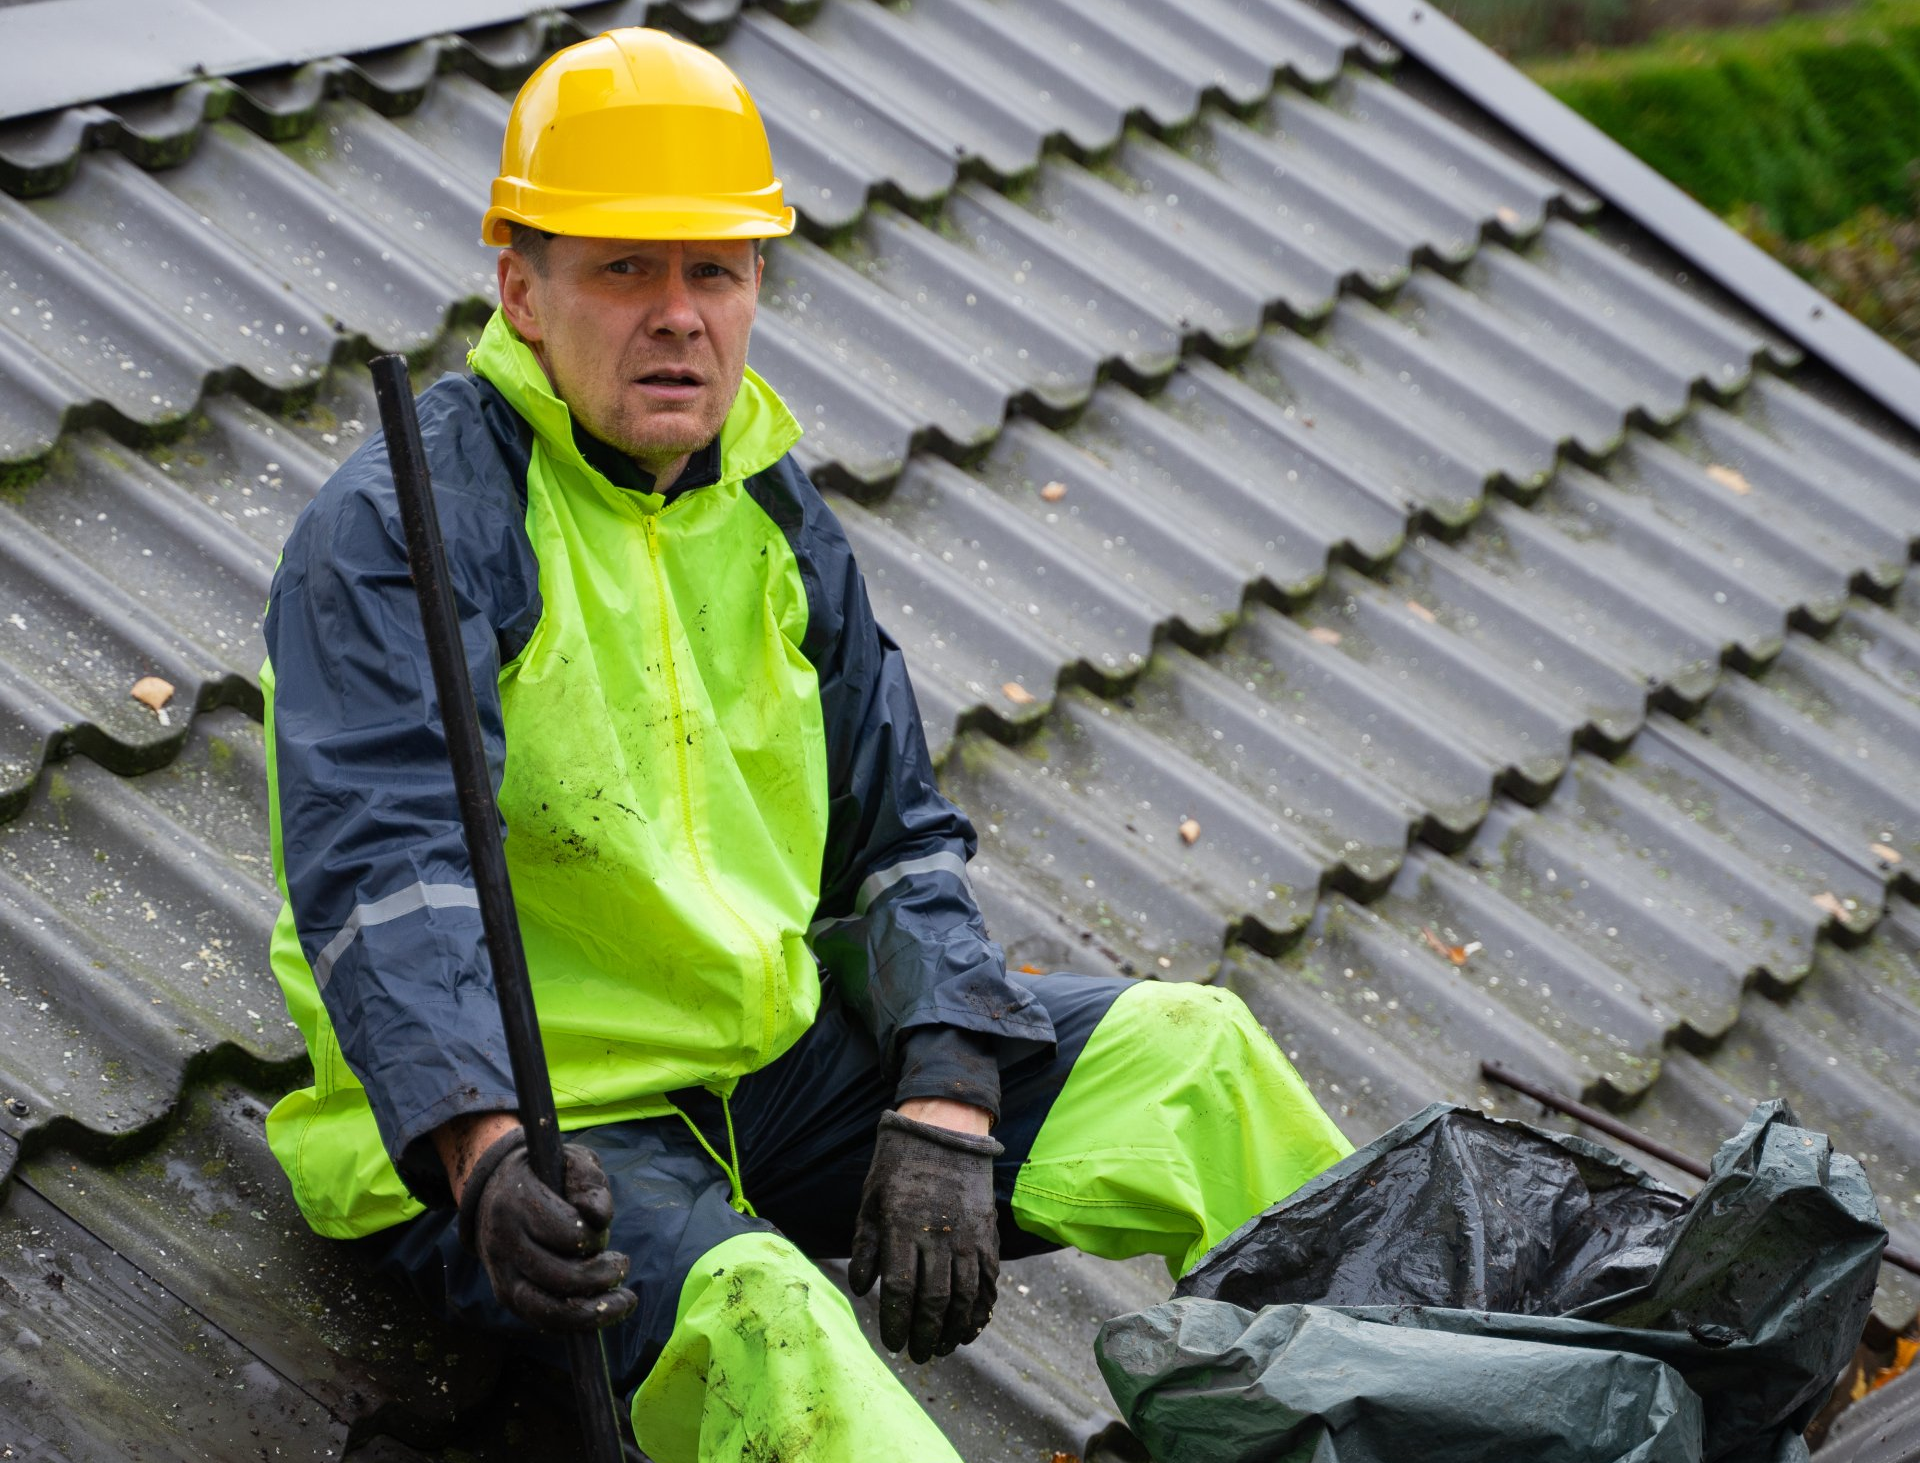 roof cleaning services